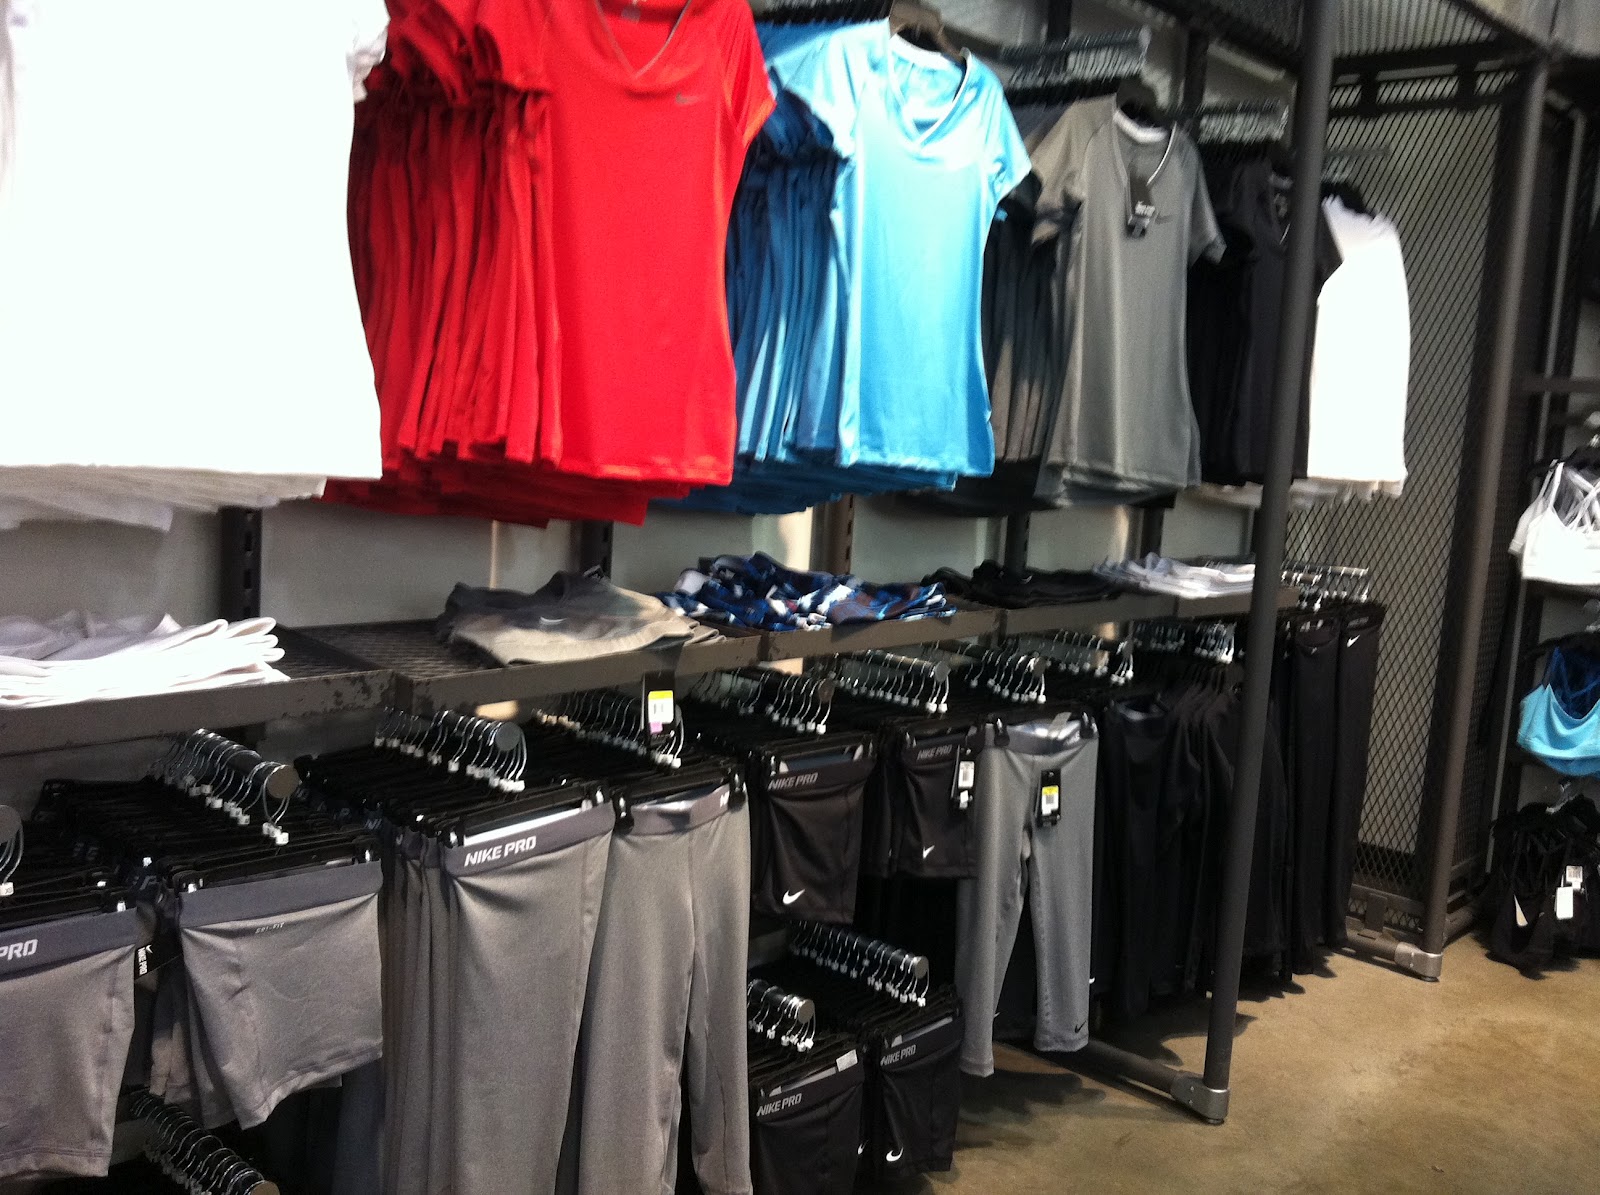 EnLove with Life: The Nike Employee Store